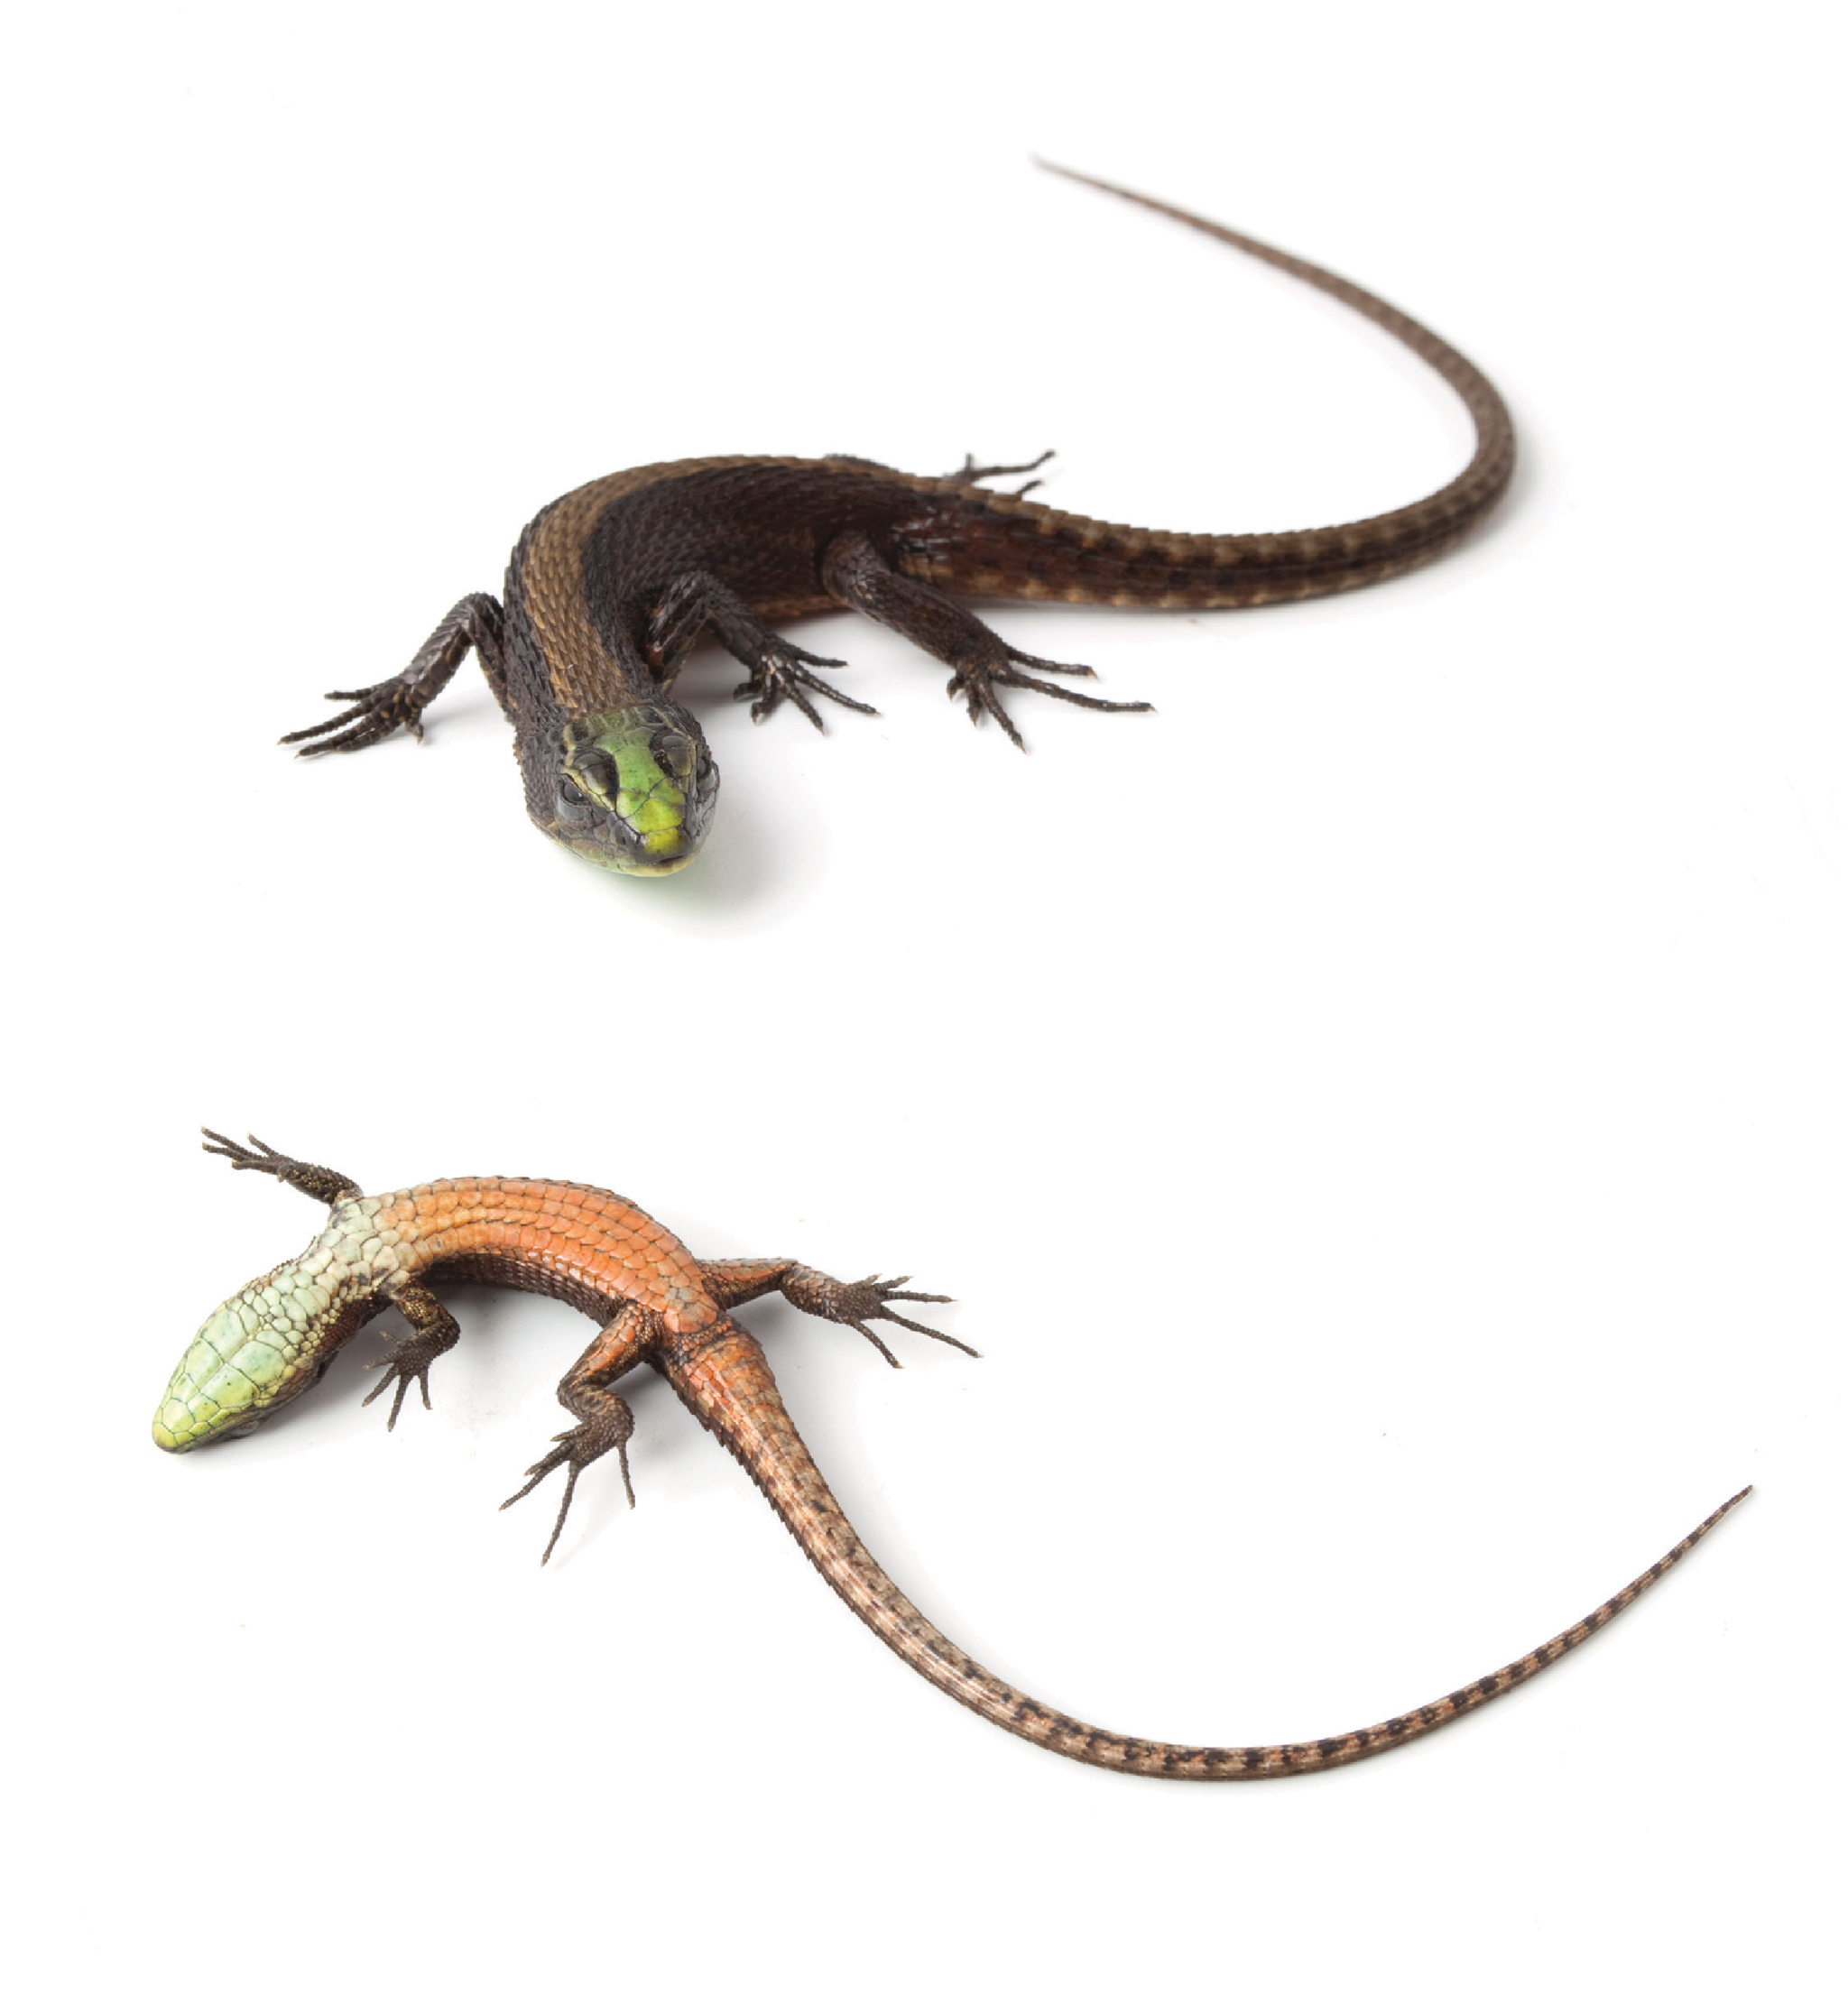 Emerald Lizard Discovered in Ecuador – National Geographic Blog